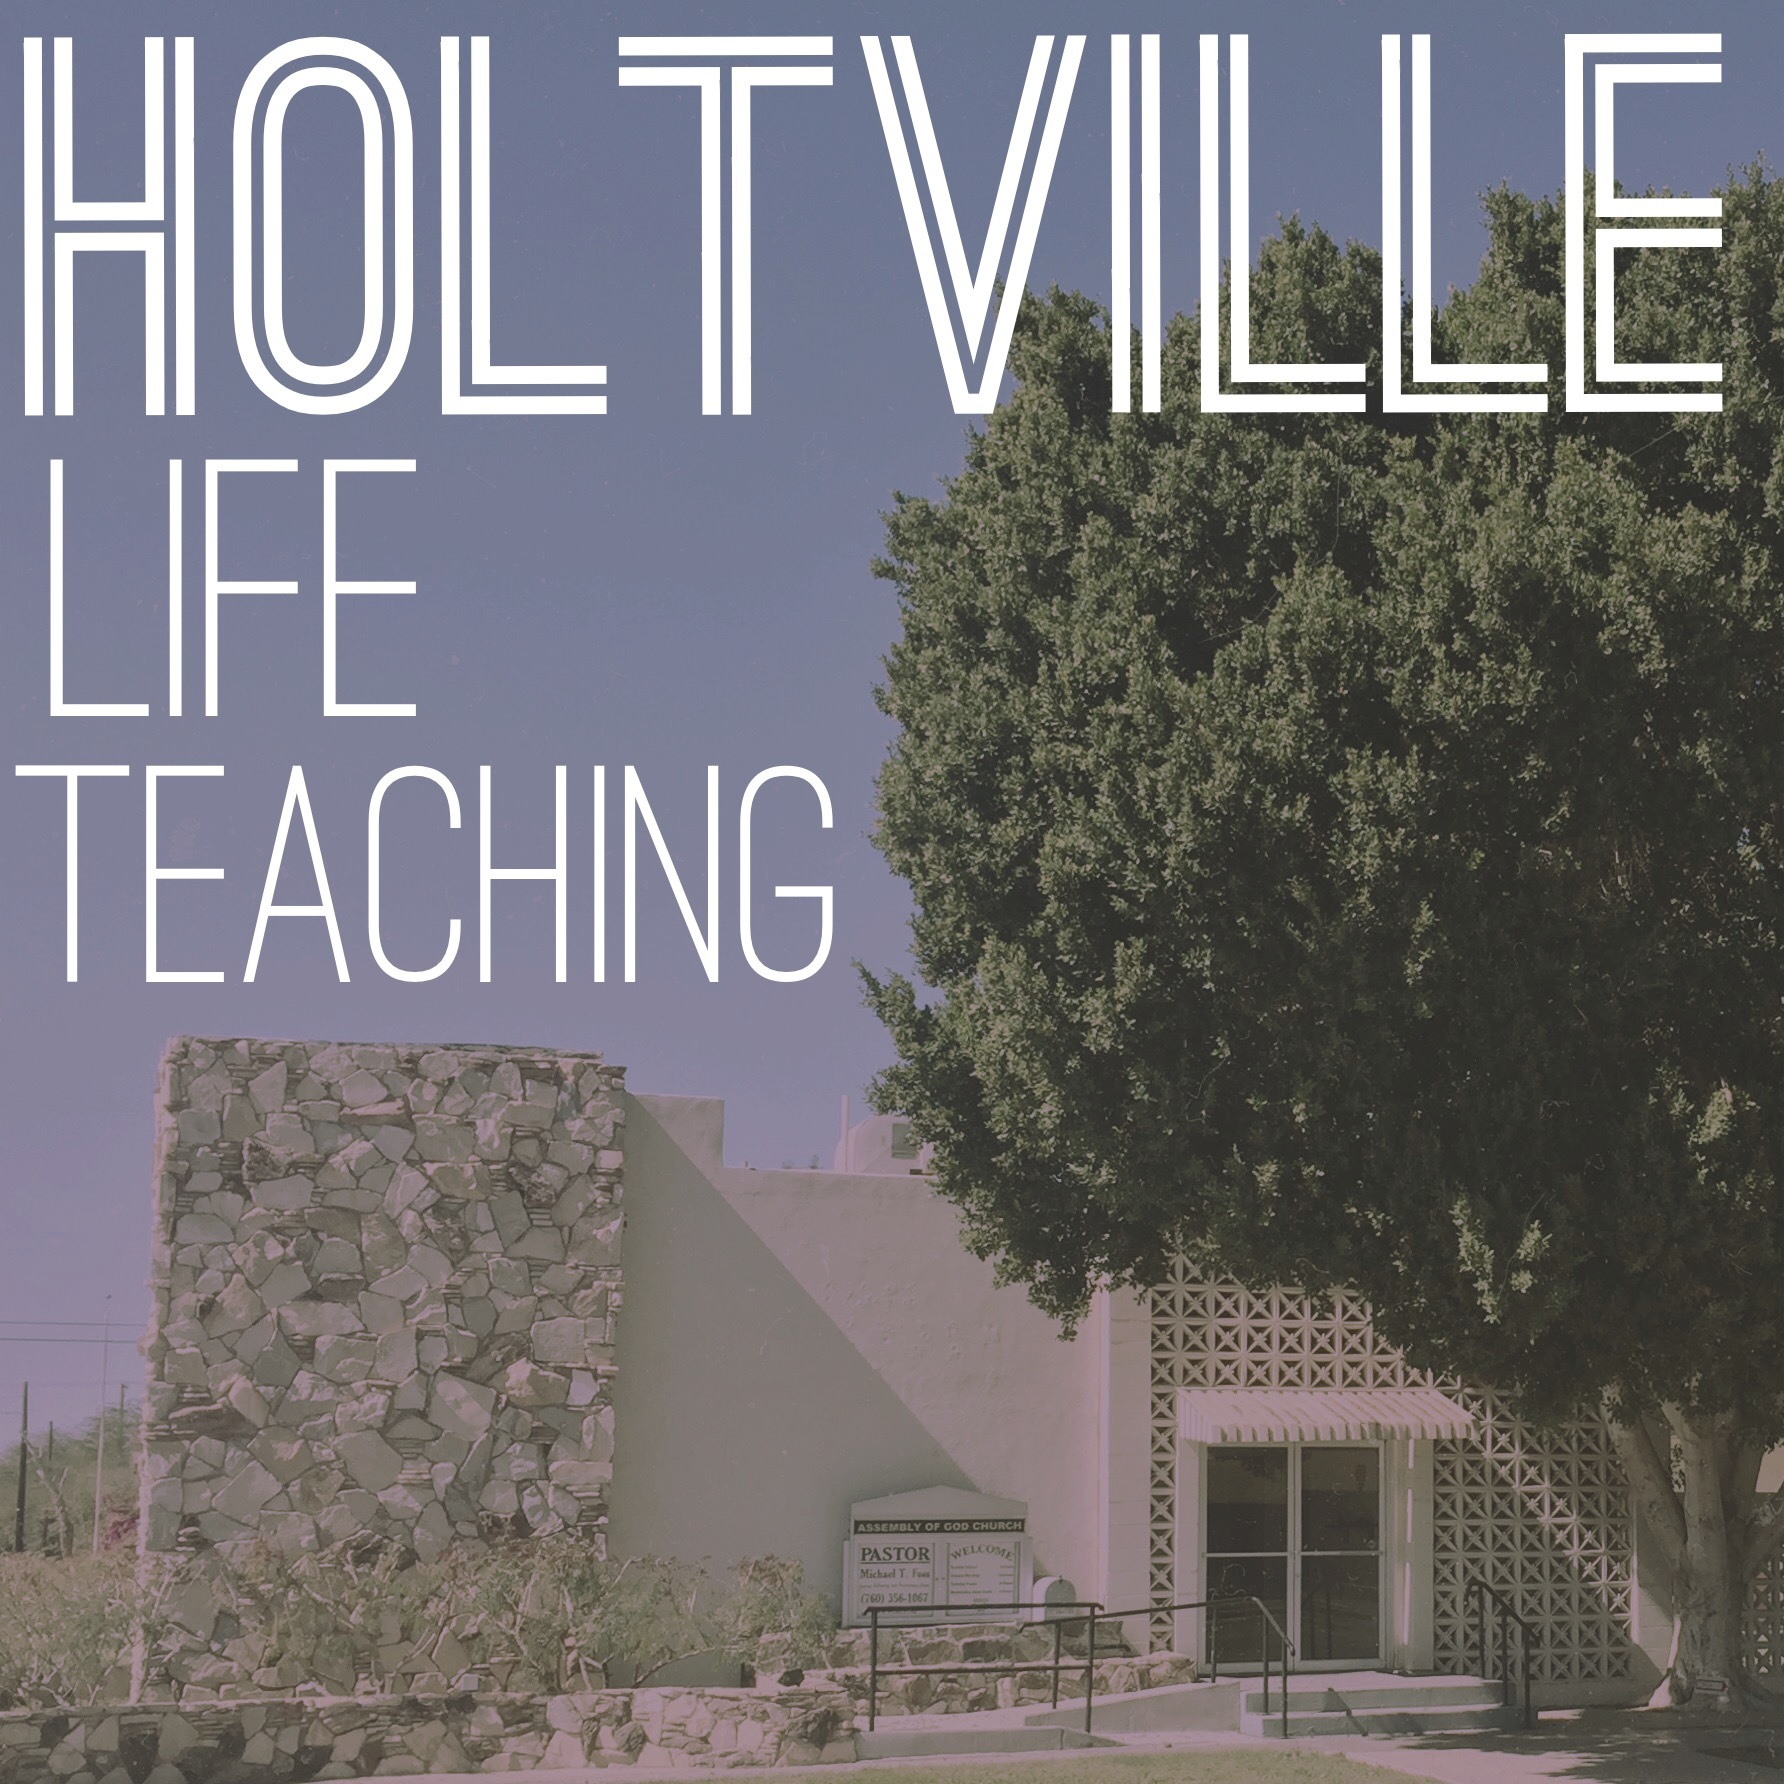 Holtville Life Teaching